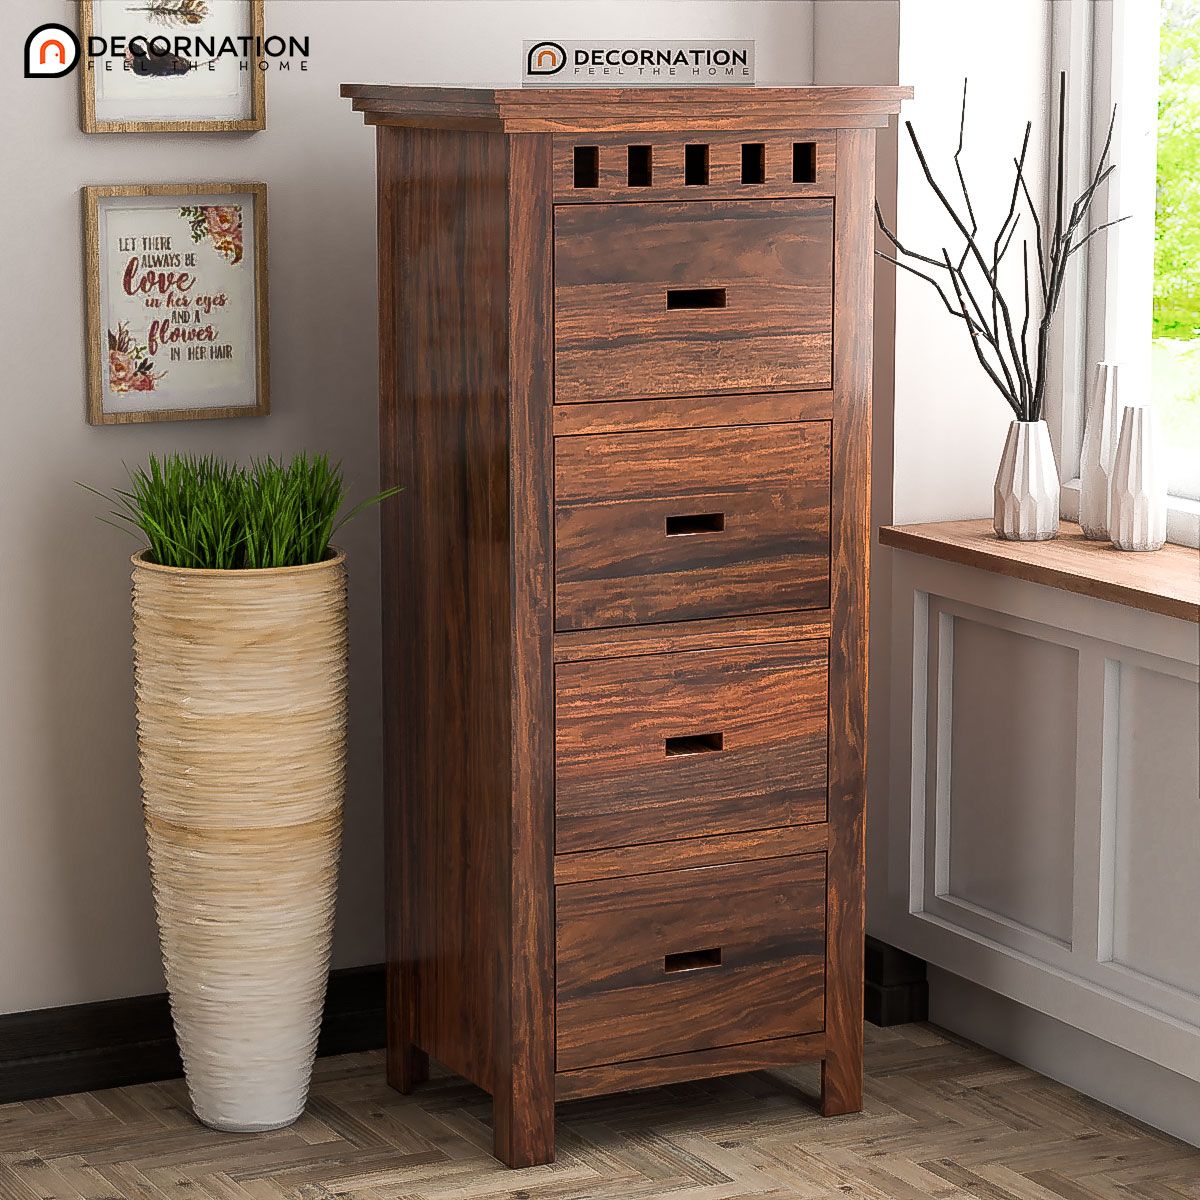 Paphos Wooden 4 Drawer Storage Cabinet – Decornation For Wood Cabinet With Drawers (View 2 of 15)